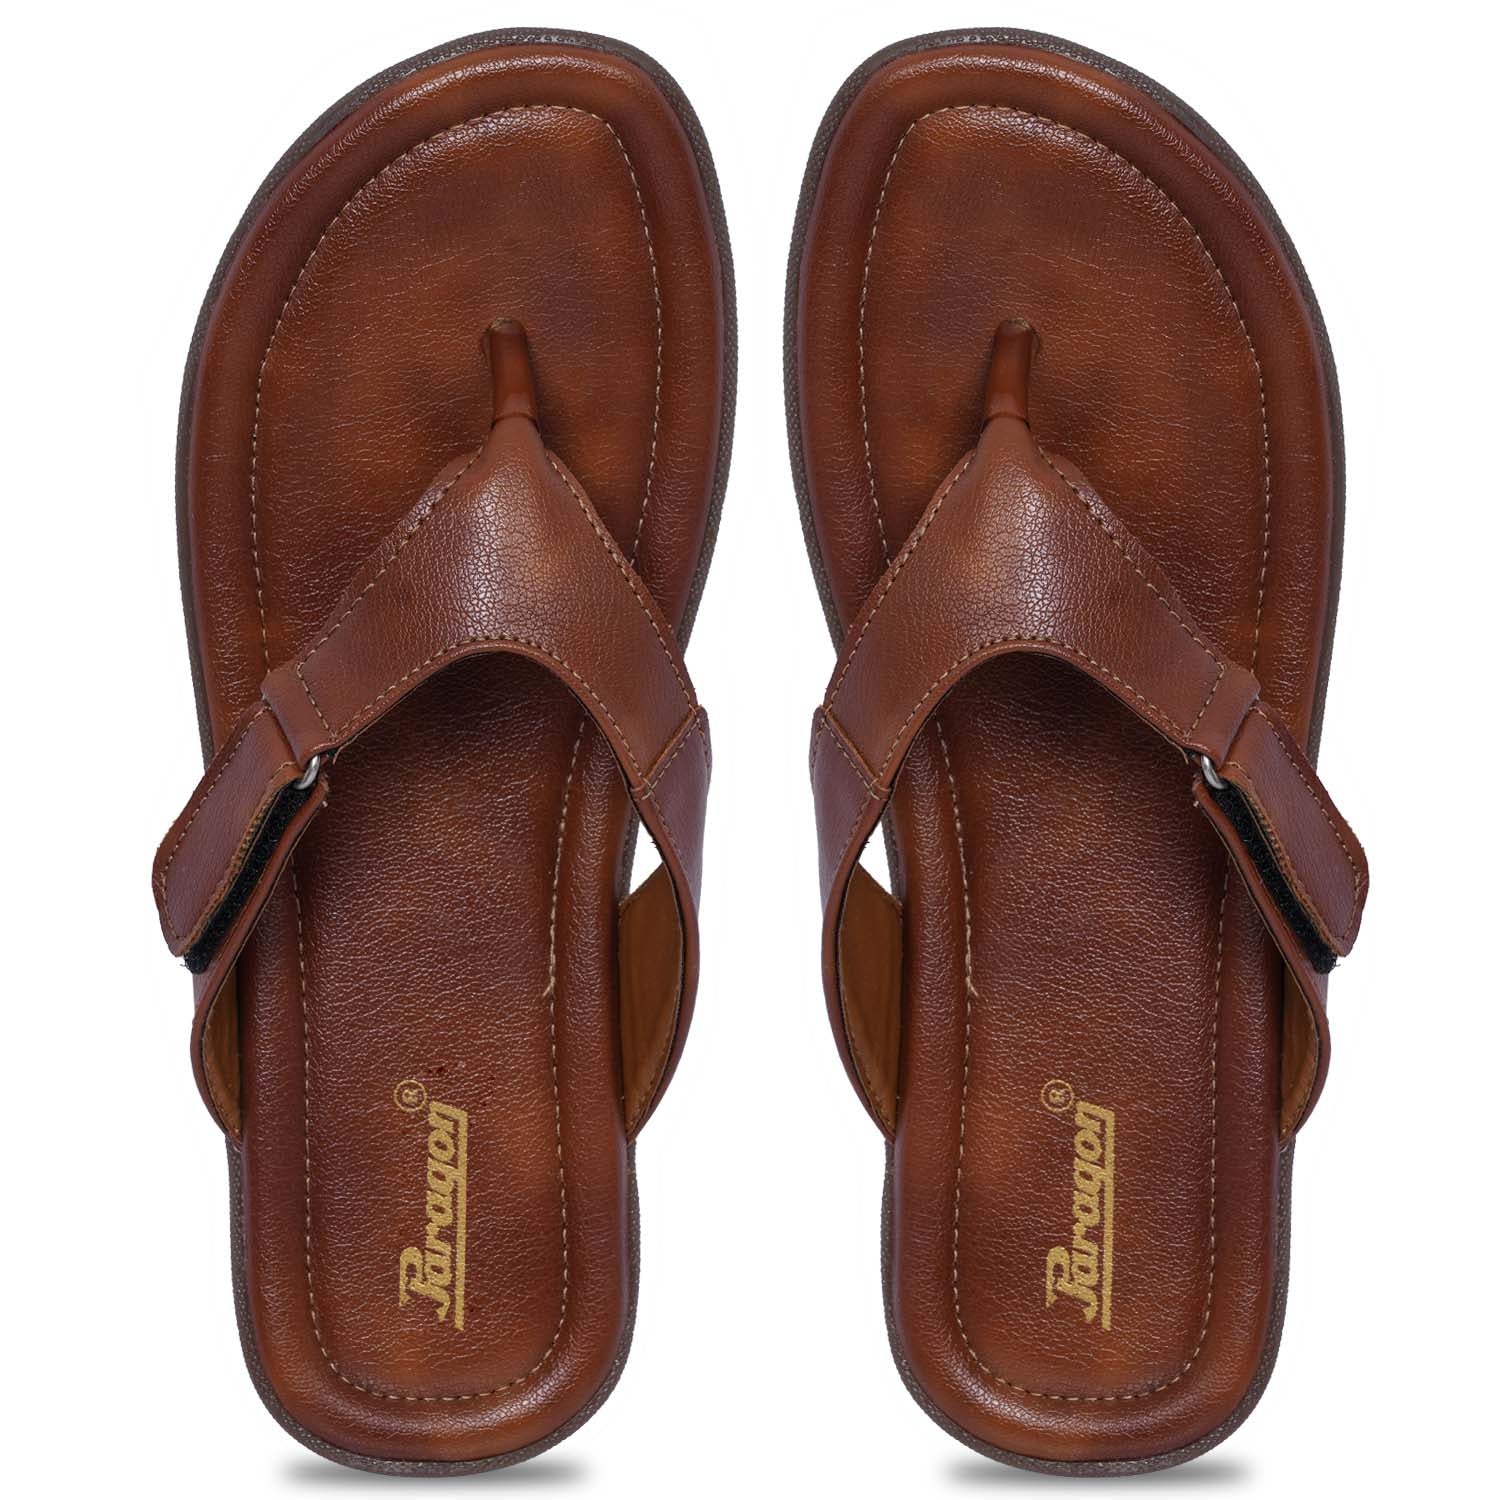 Paragon R4006G Men Stylish Sandals | Comfortable Sandals for Daily Outdoor Use | Casual Formal Sandals with Cushioned Soles